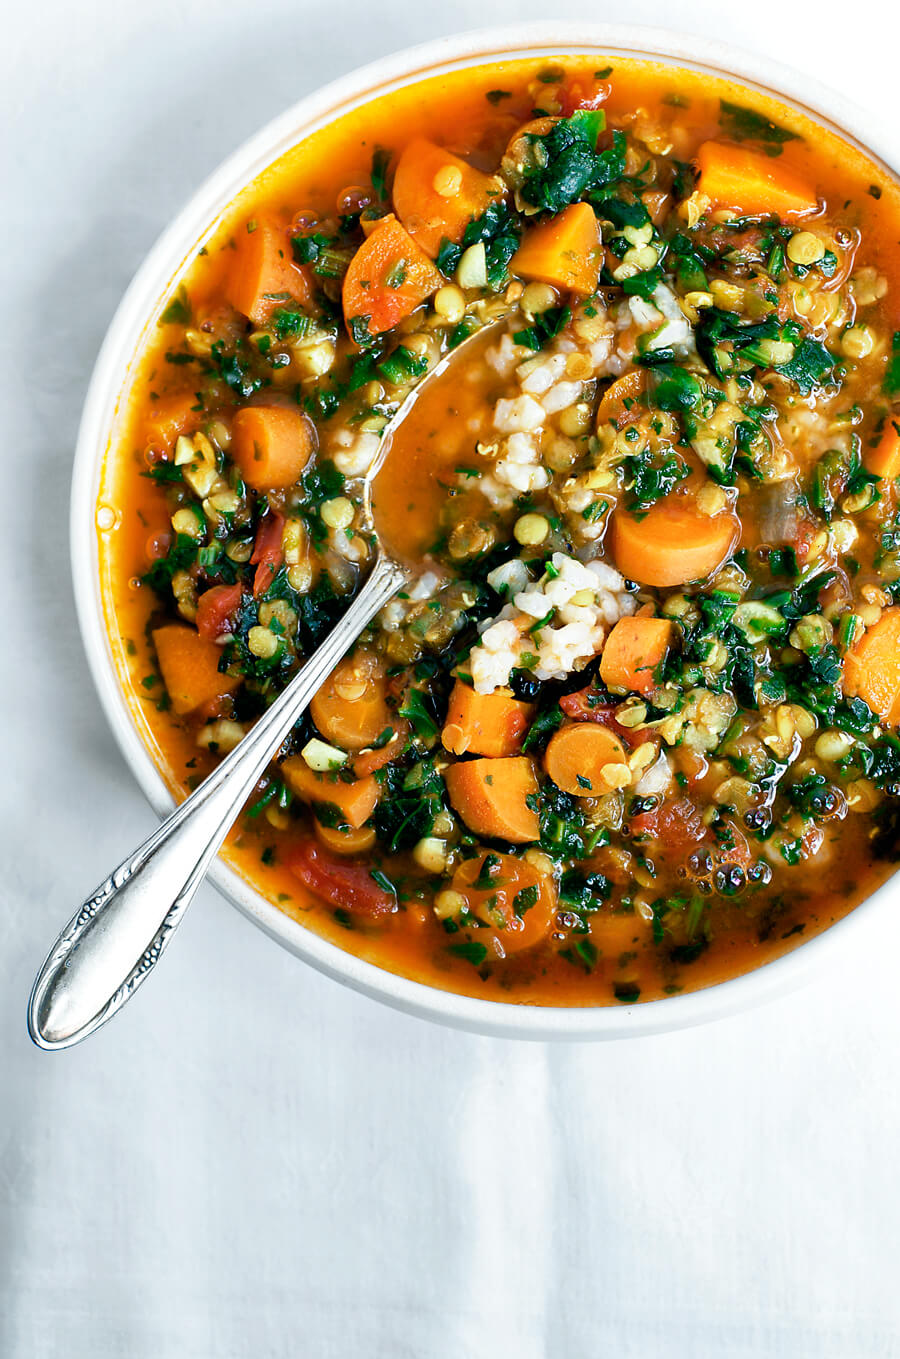 Carrot, Lentil, and Spinach Soup